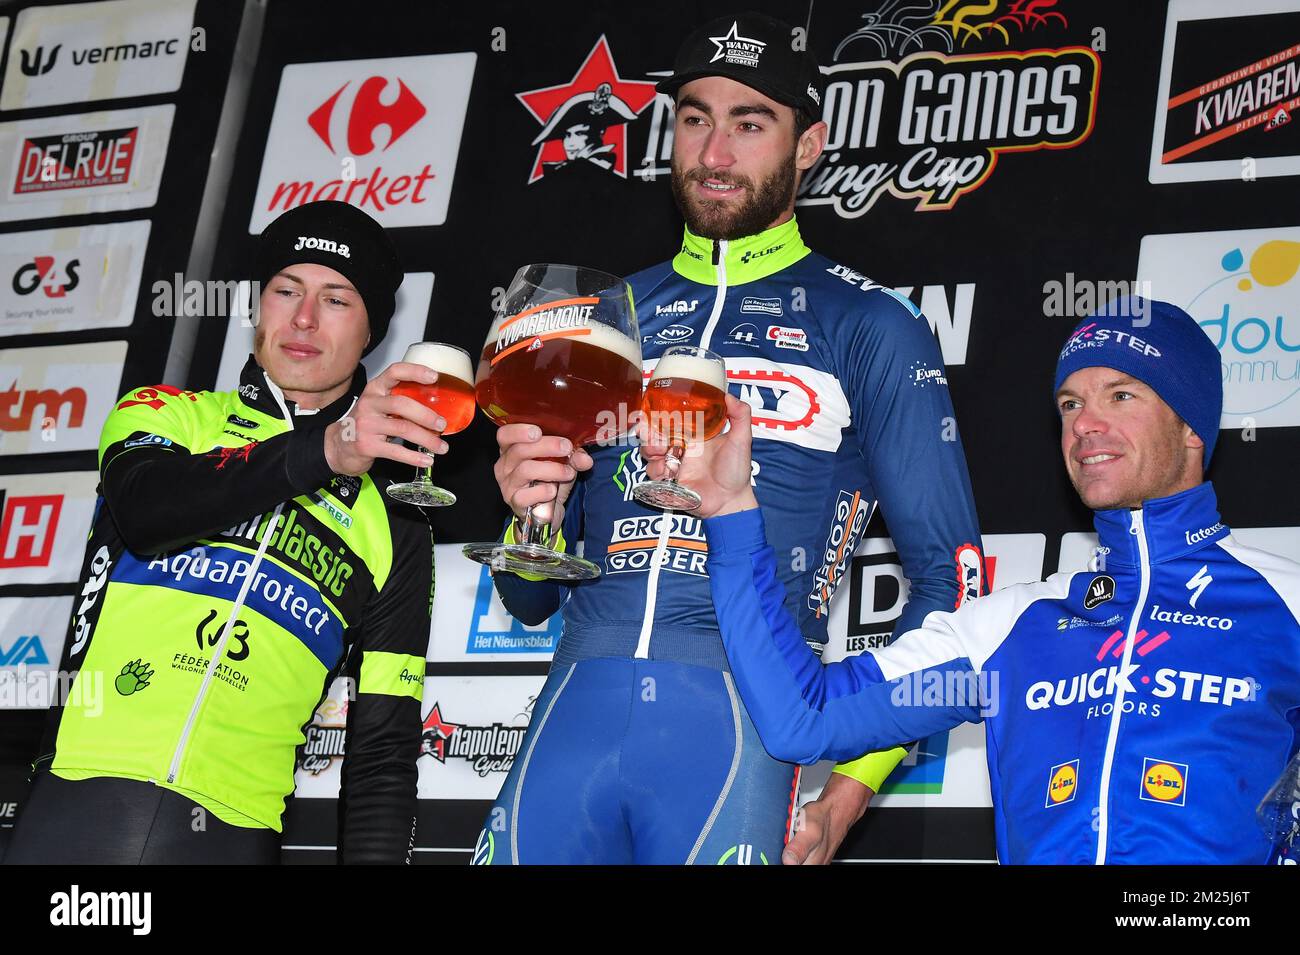 Luxembourgian Alex Kirsch of WB Veranclassic Aqua Protect, Belgian Guillaume Van Keirsbulck of Wanty-Groupe Gobert and Belgian Iljo Keisse of Quick-Step Floors celebrate on the podium after the 49th edition of the Grand Prix du Samyn cycling race, Wednesday 01 March 2017. The race starts in Quaregnon and ends in Dour (202,6km). The Grand Prix du Samyn is also the first round of the Napoleon Games Cup. BELGA PHOTO DAVID STOCKMAN Stock Photo